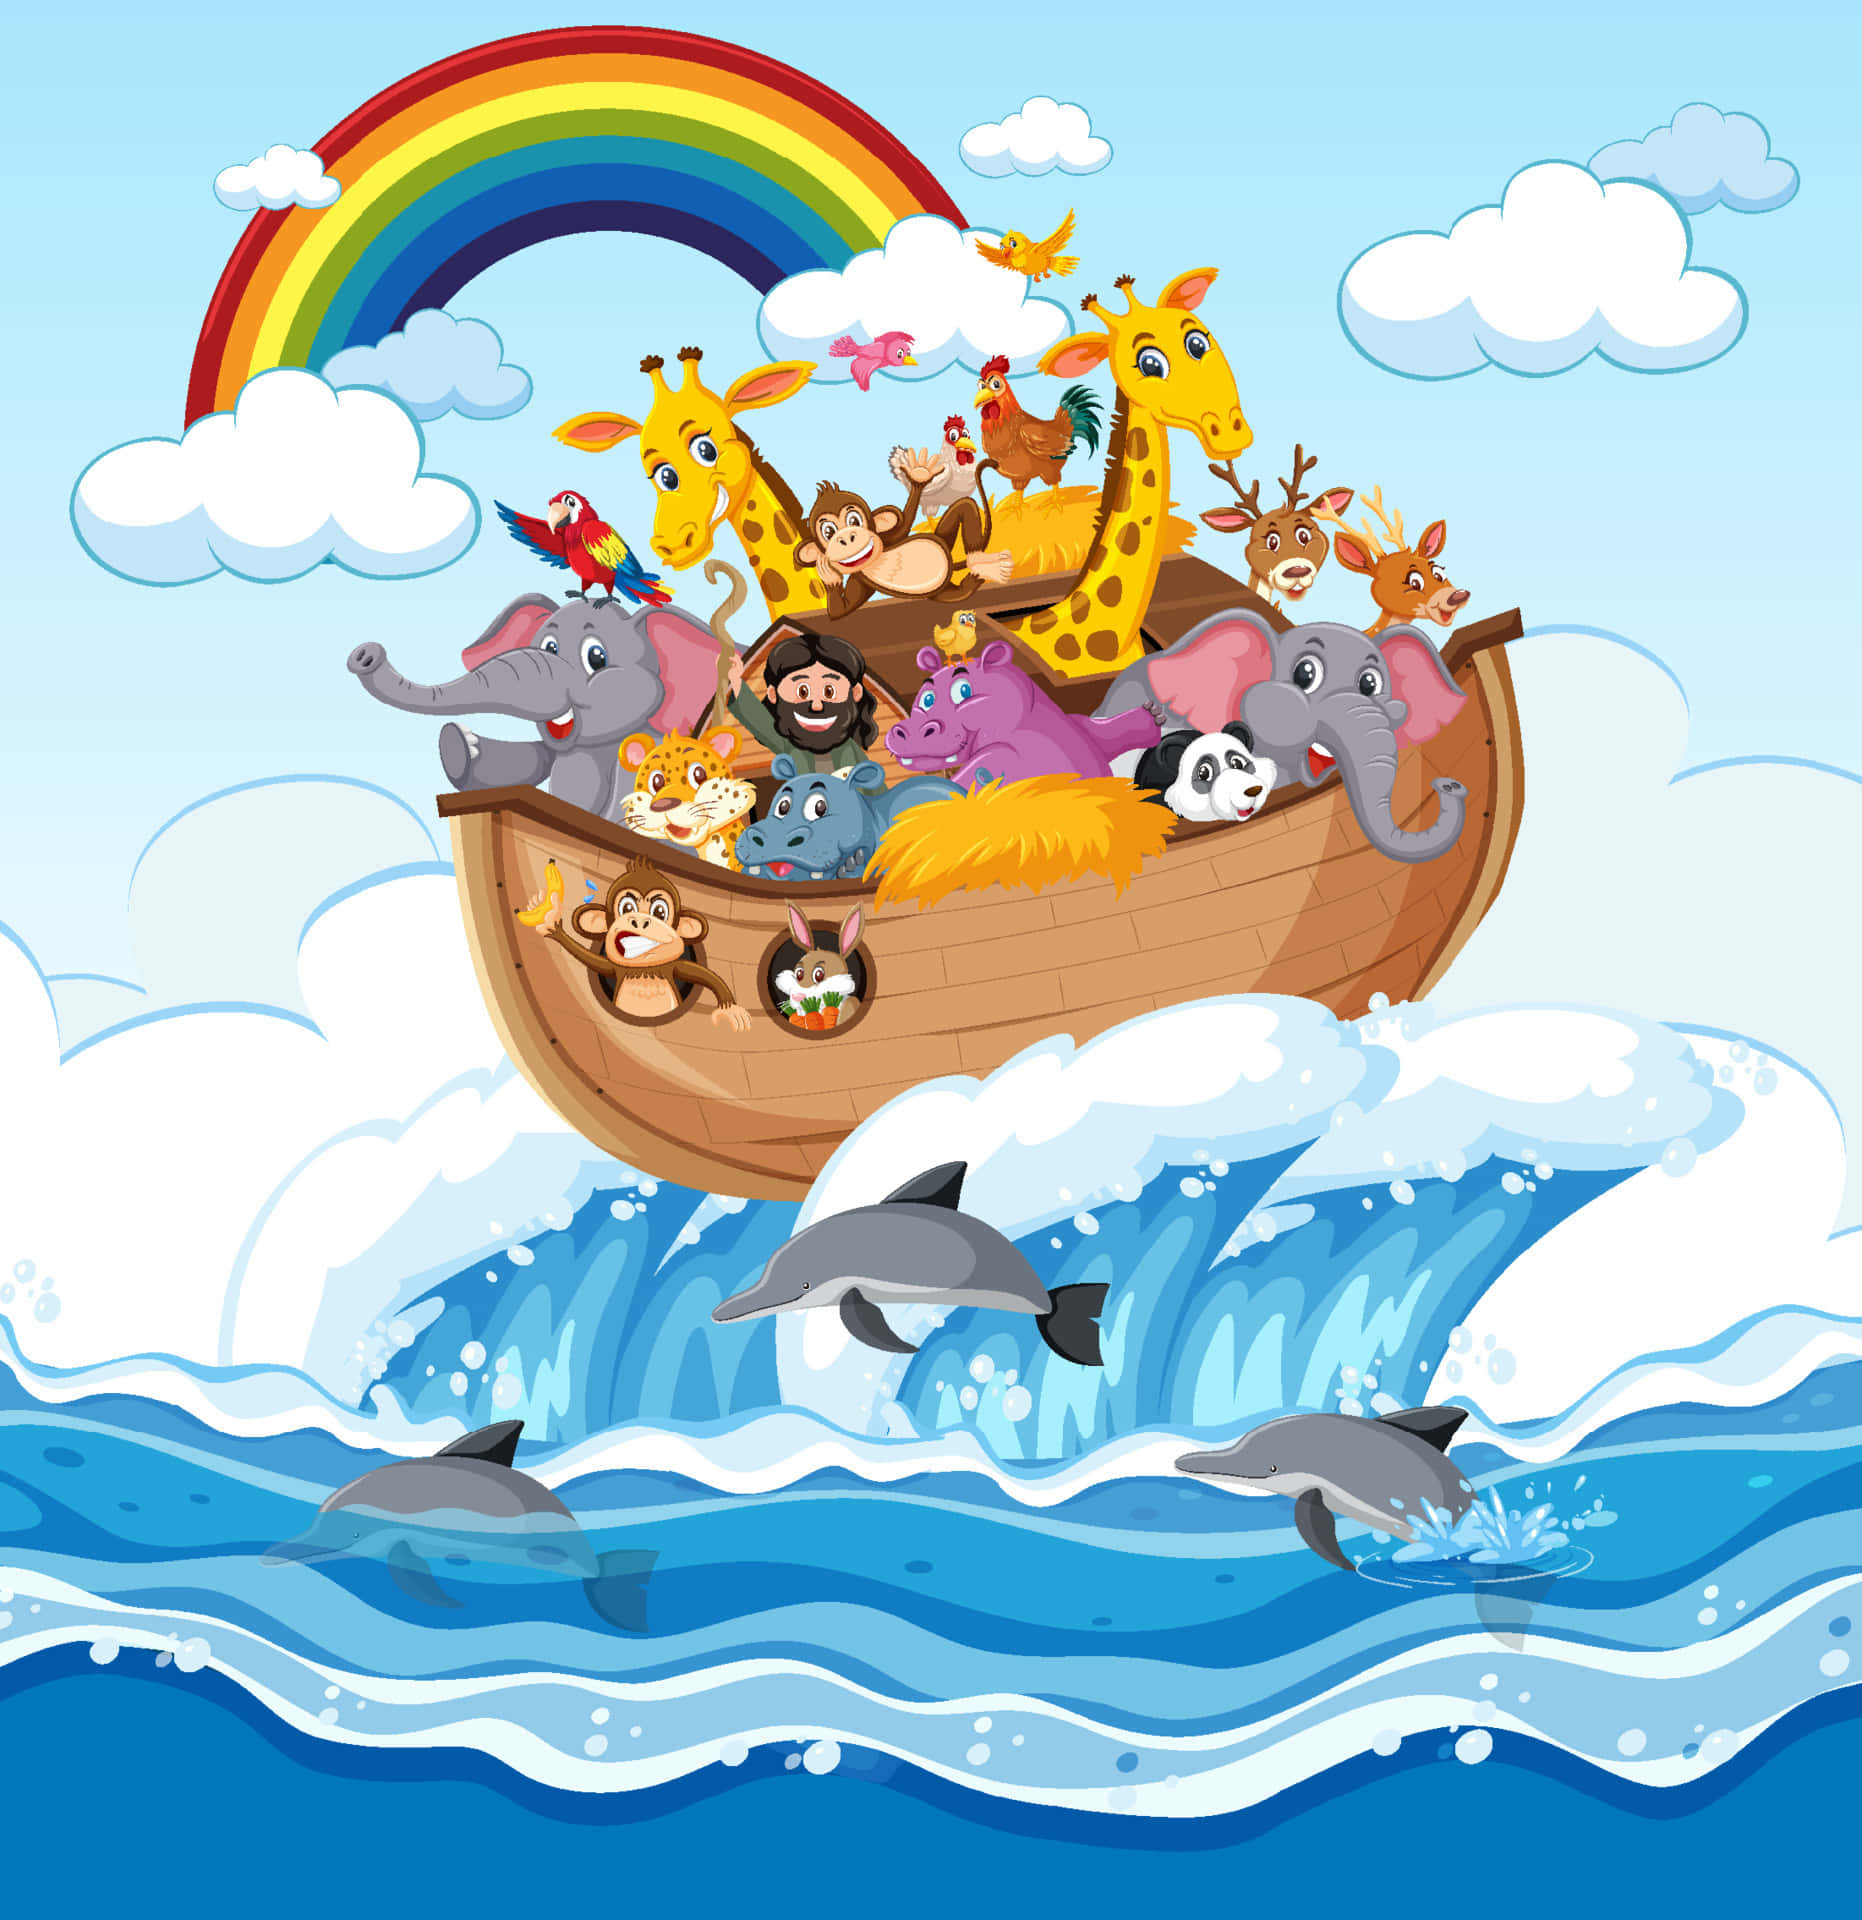 Noah's grand ark set sail during the time of the great flood